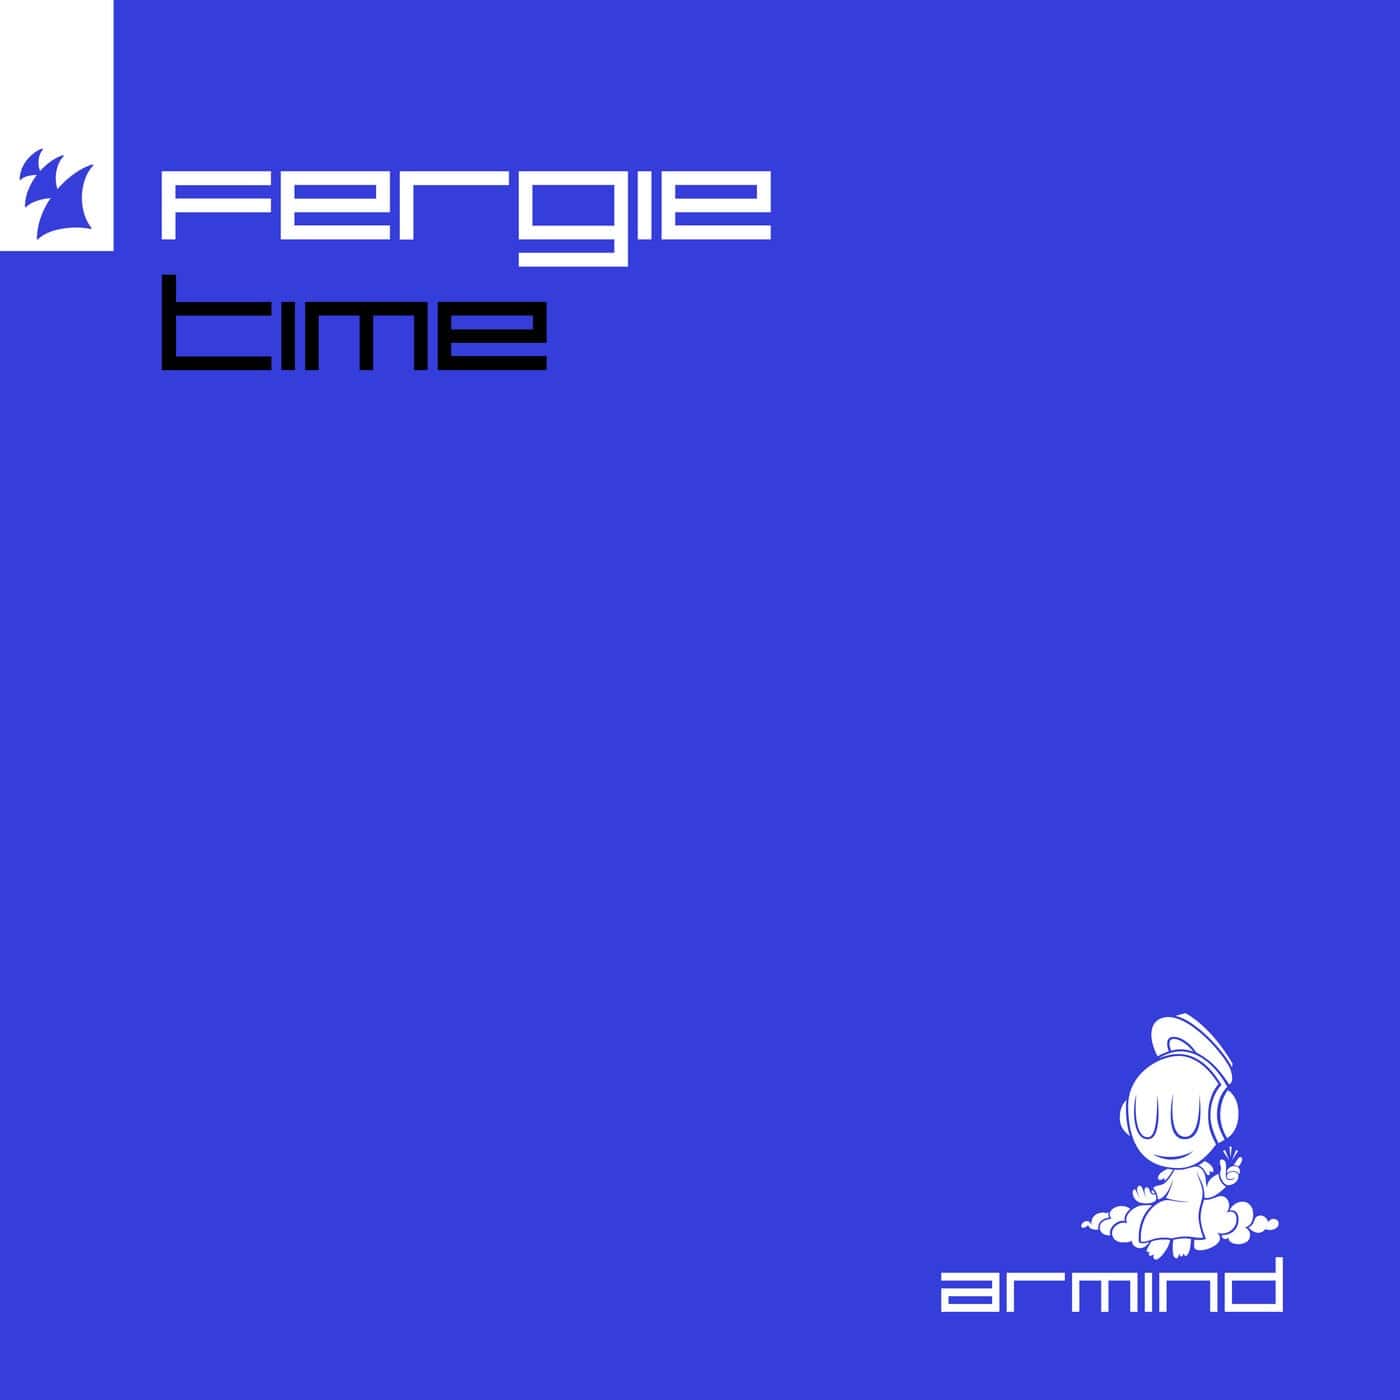 Download Fergie - Time on Electrobuzz